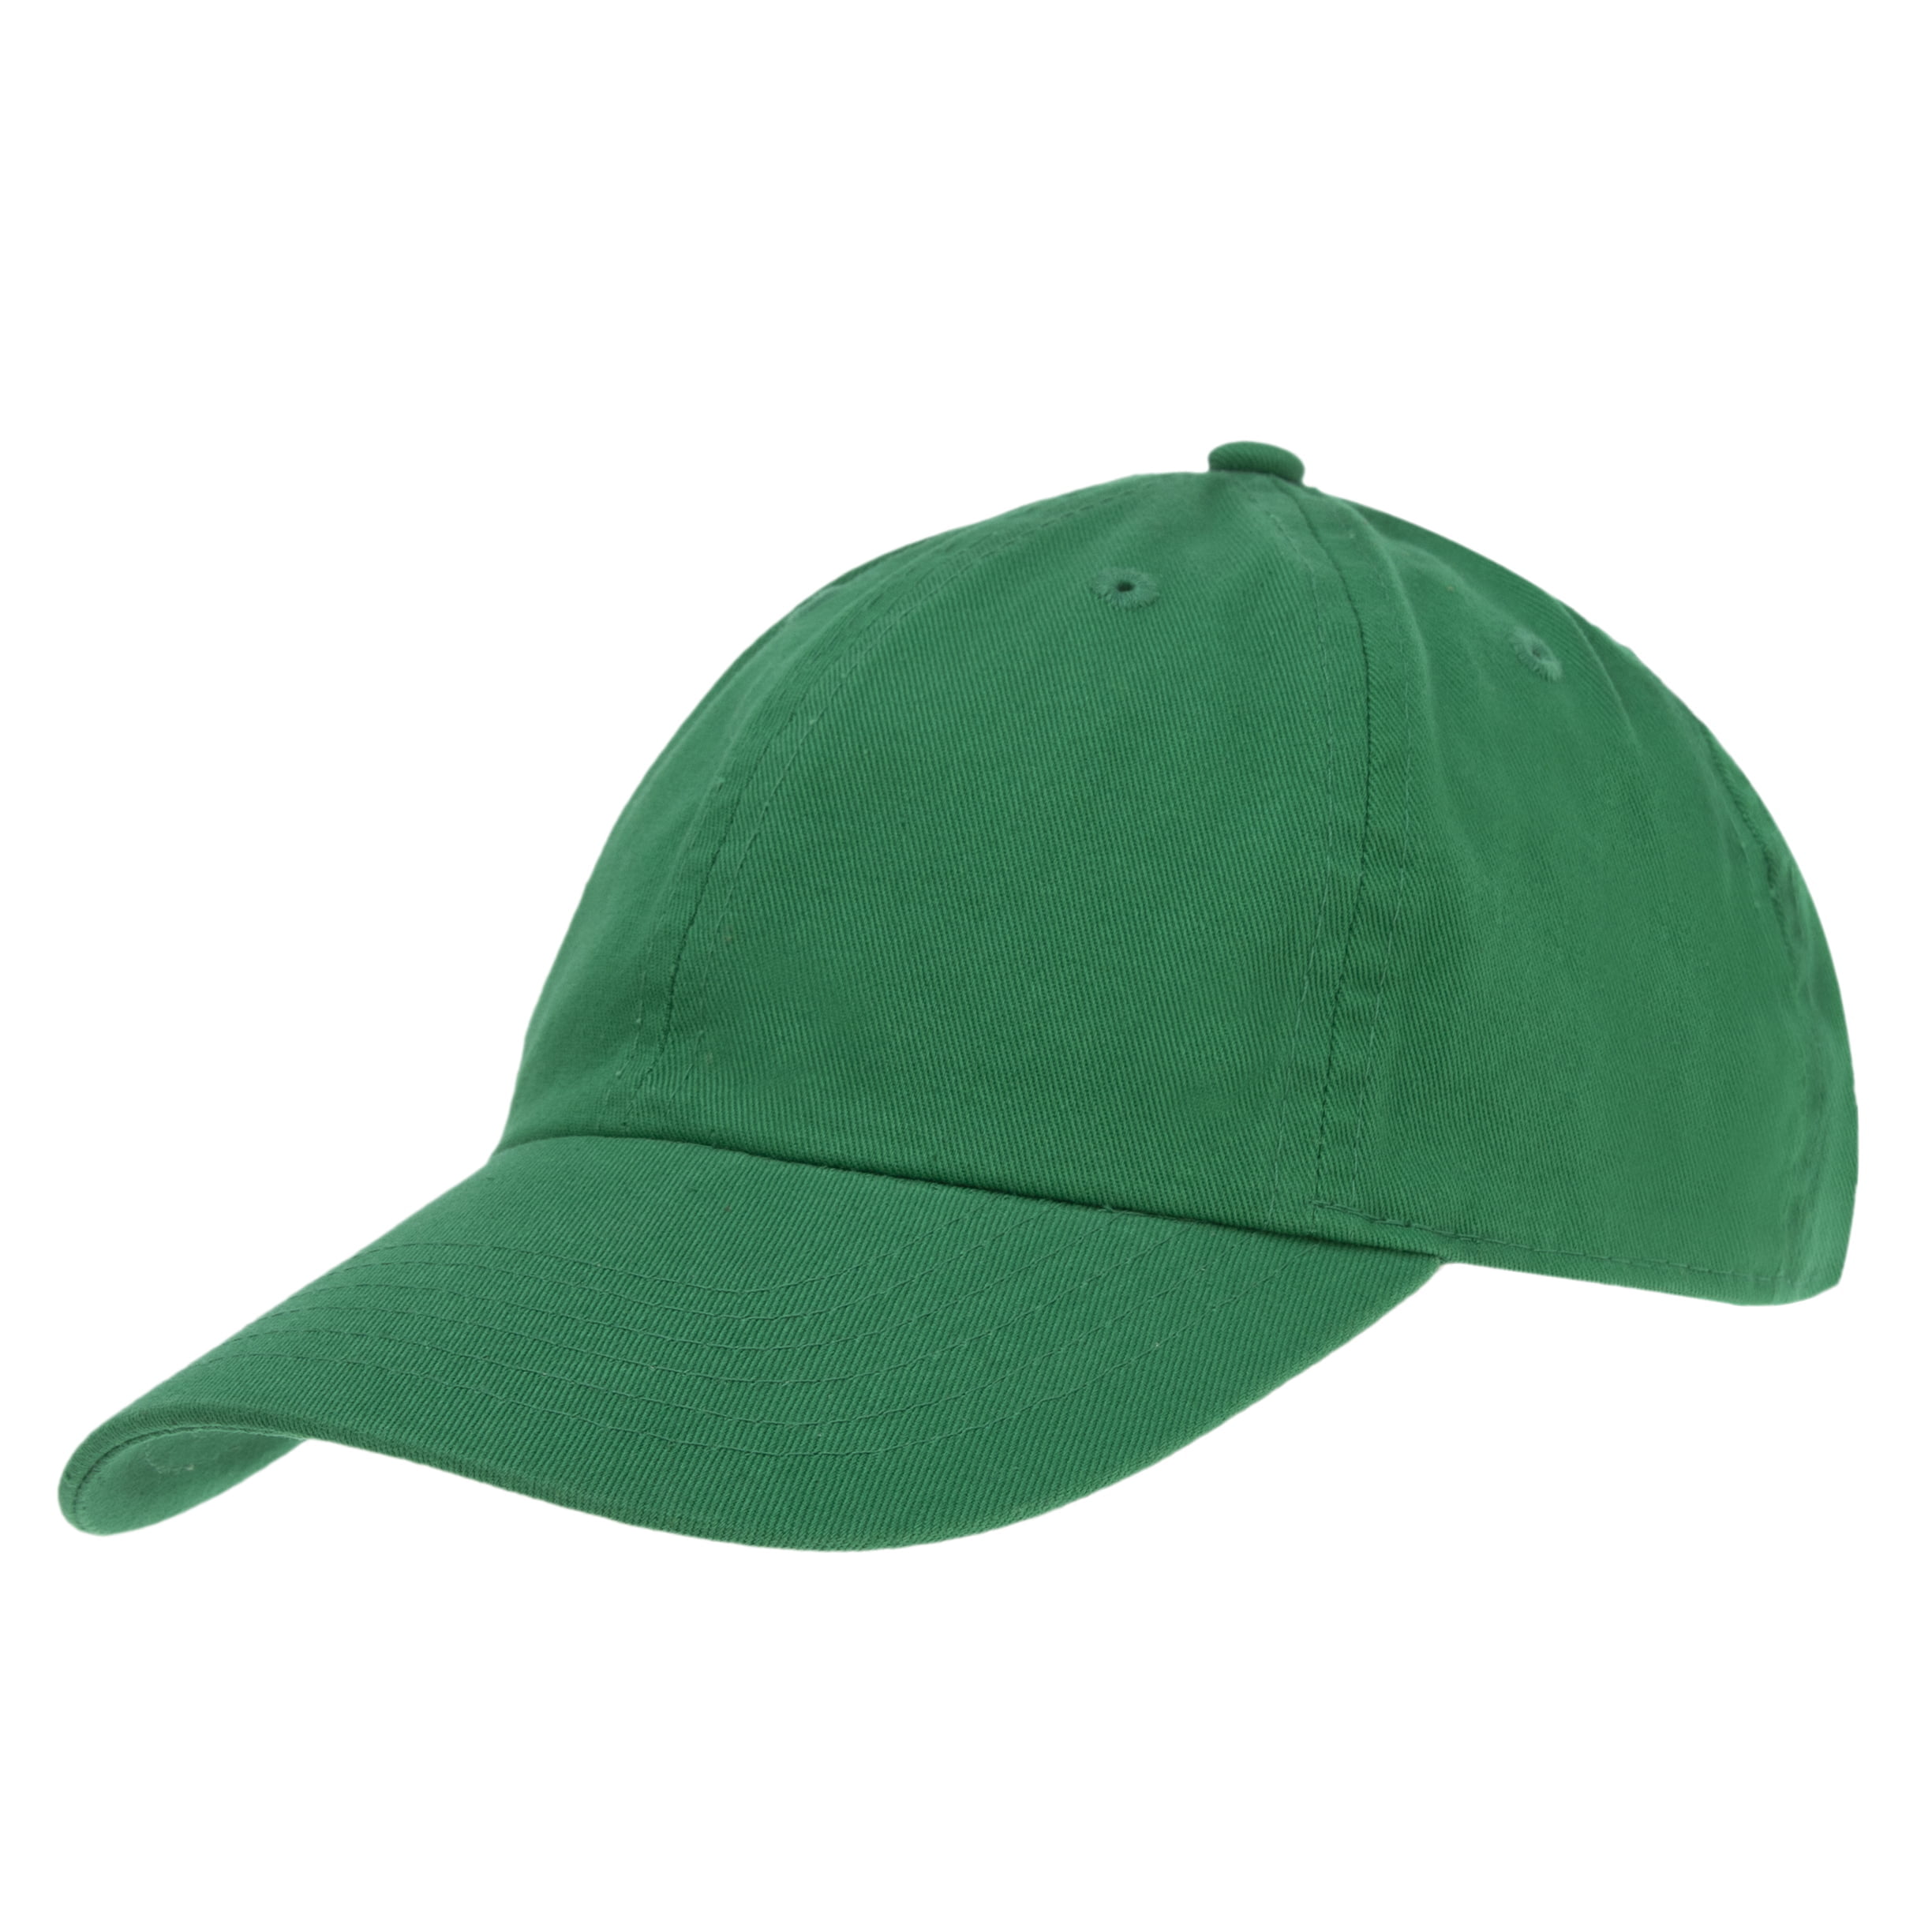 12pcs Kelly Green Solid Baseball Hats Low Profile - Unconstructed - Adjustable Clasp - 100% Cotton - Stone Washed - Bulk by the Dozen - Wholesale